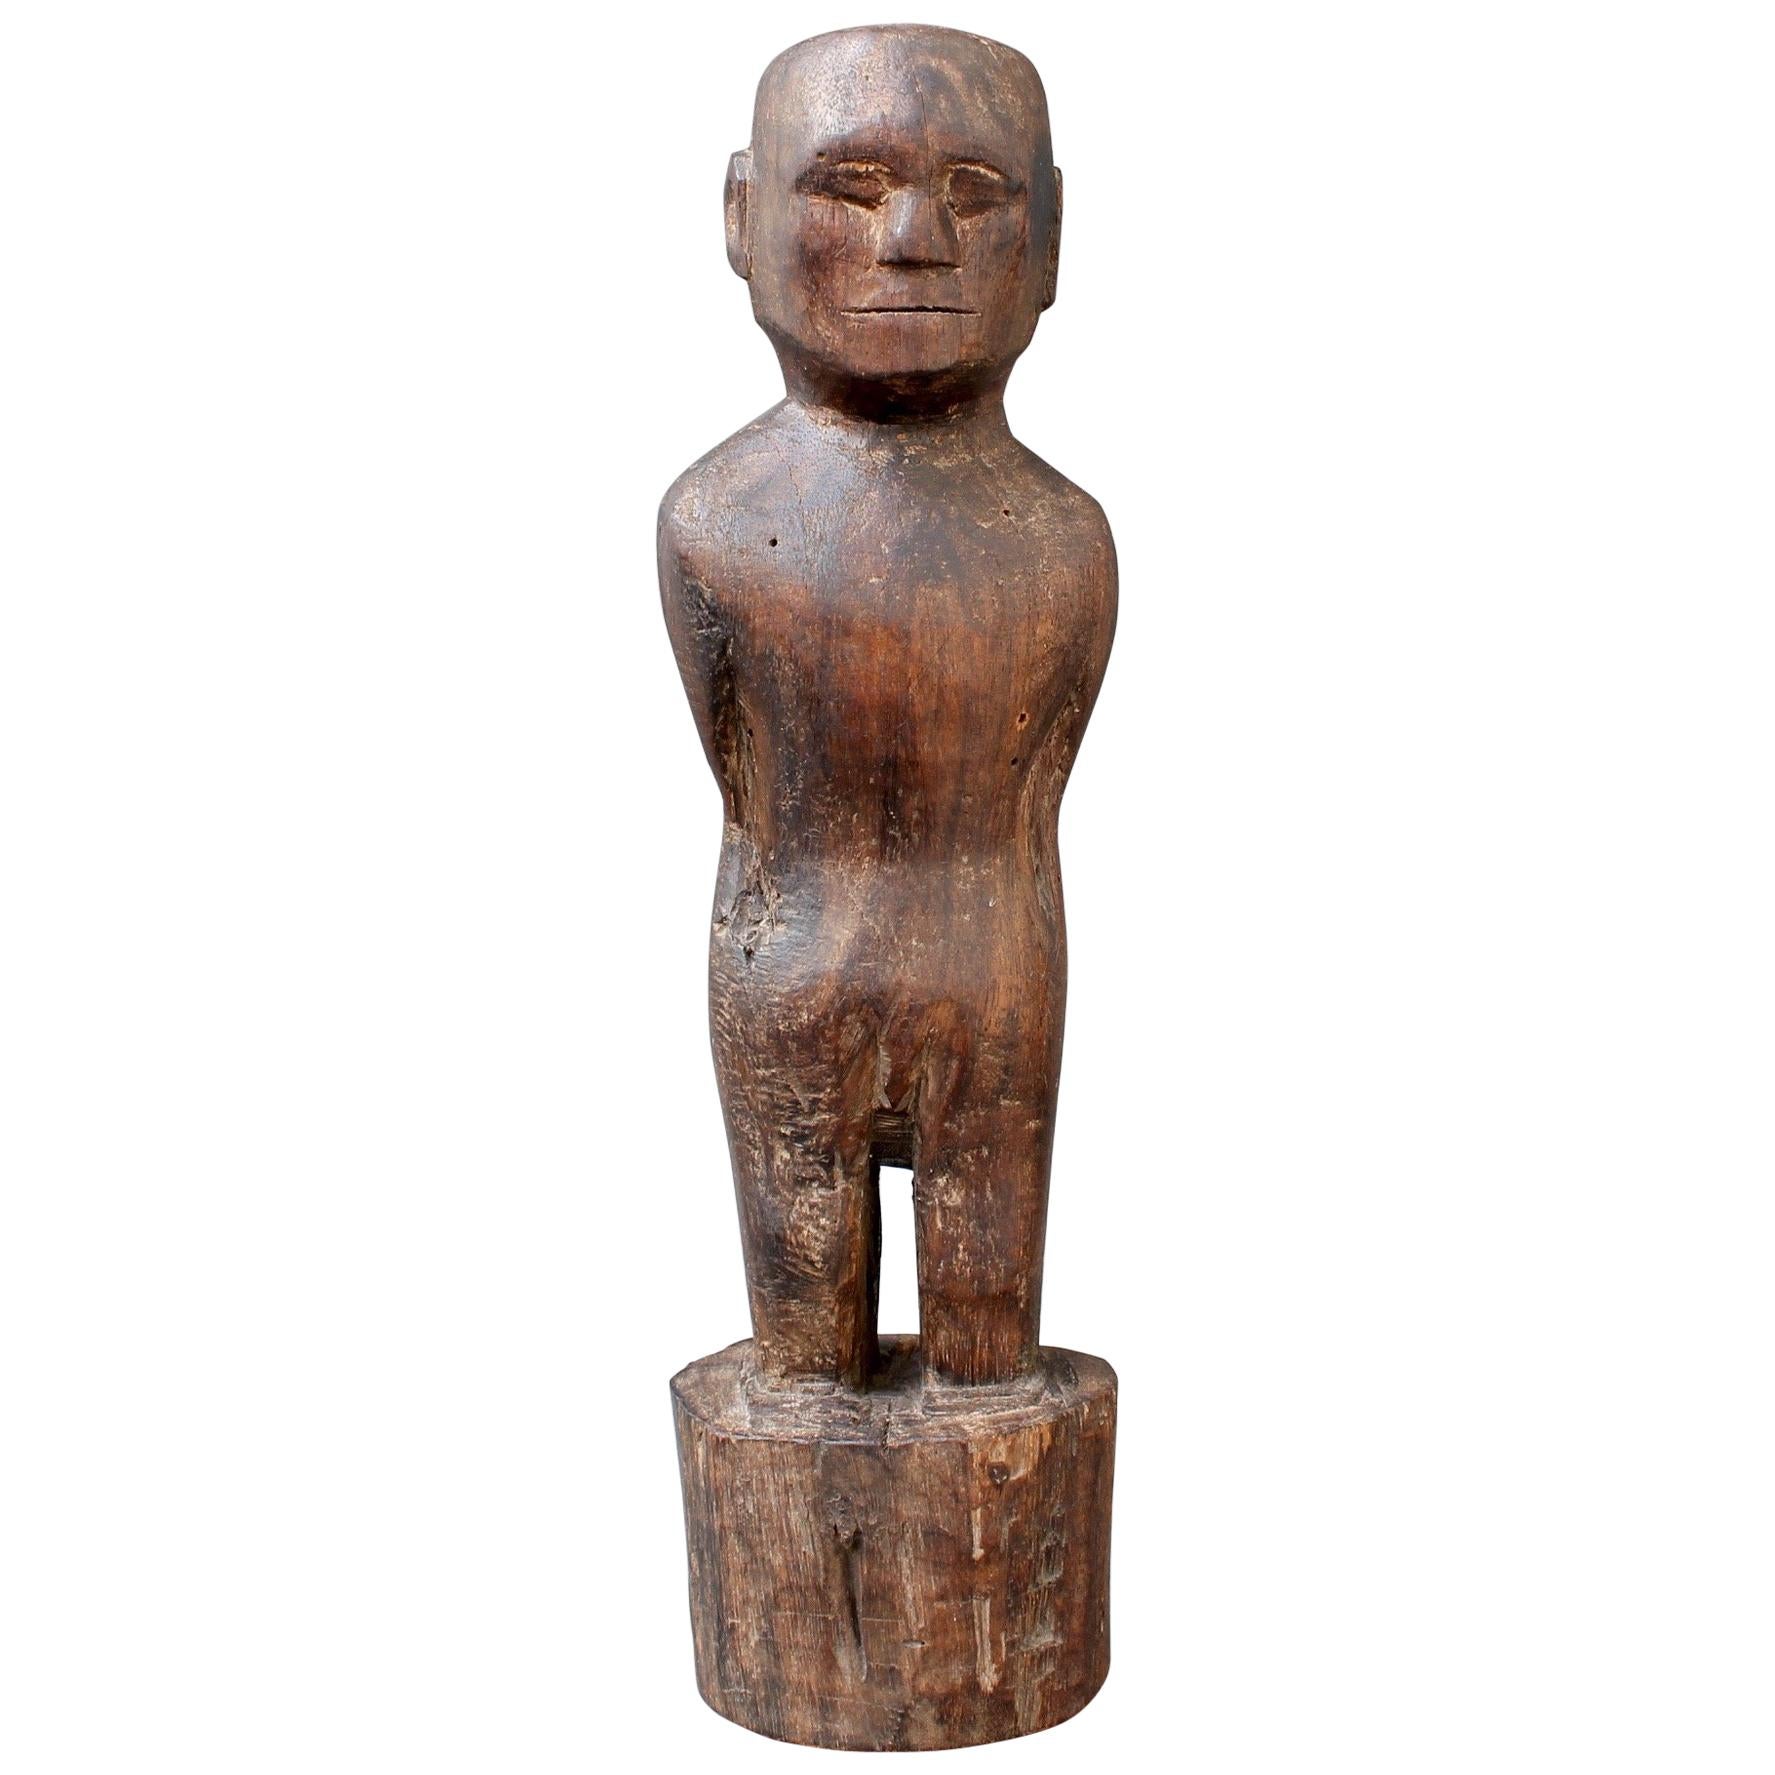 Wooden Carving or Sculpture of Standing Ancestral Figure from Timor, Indonesia